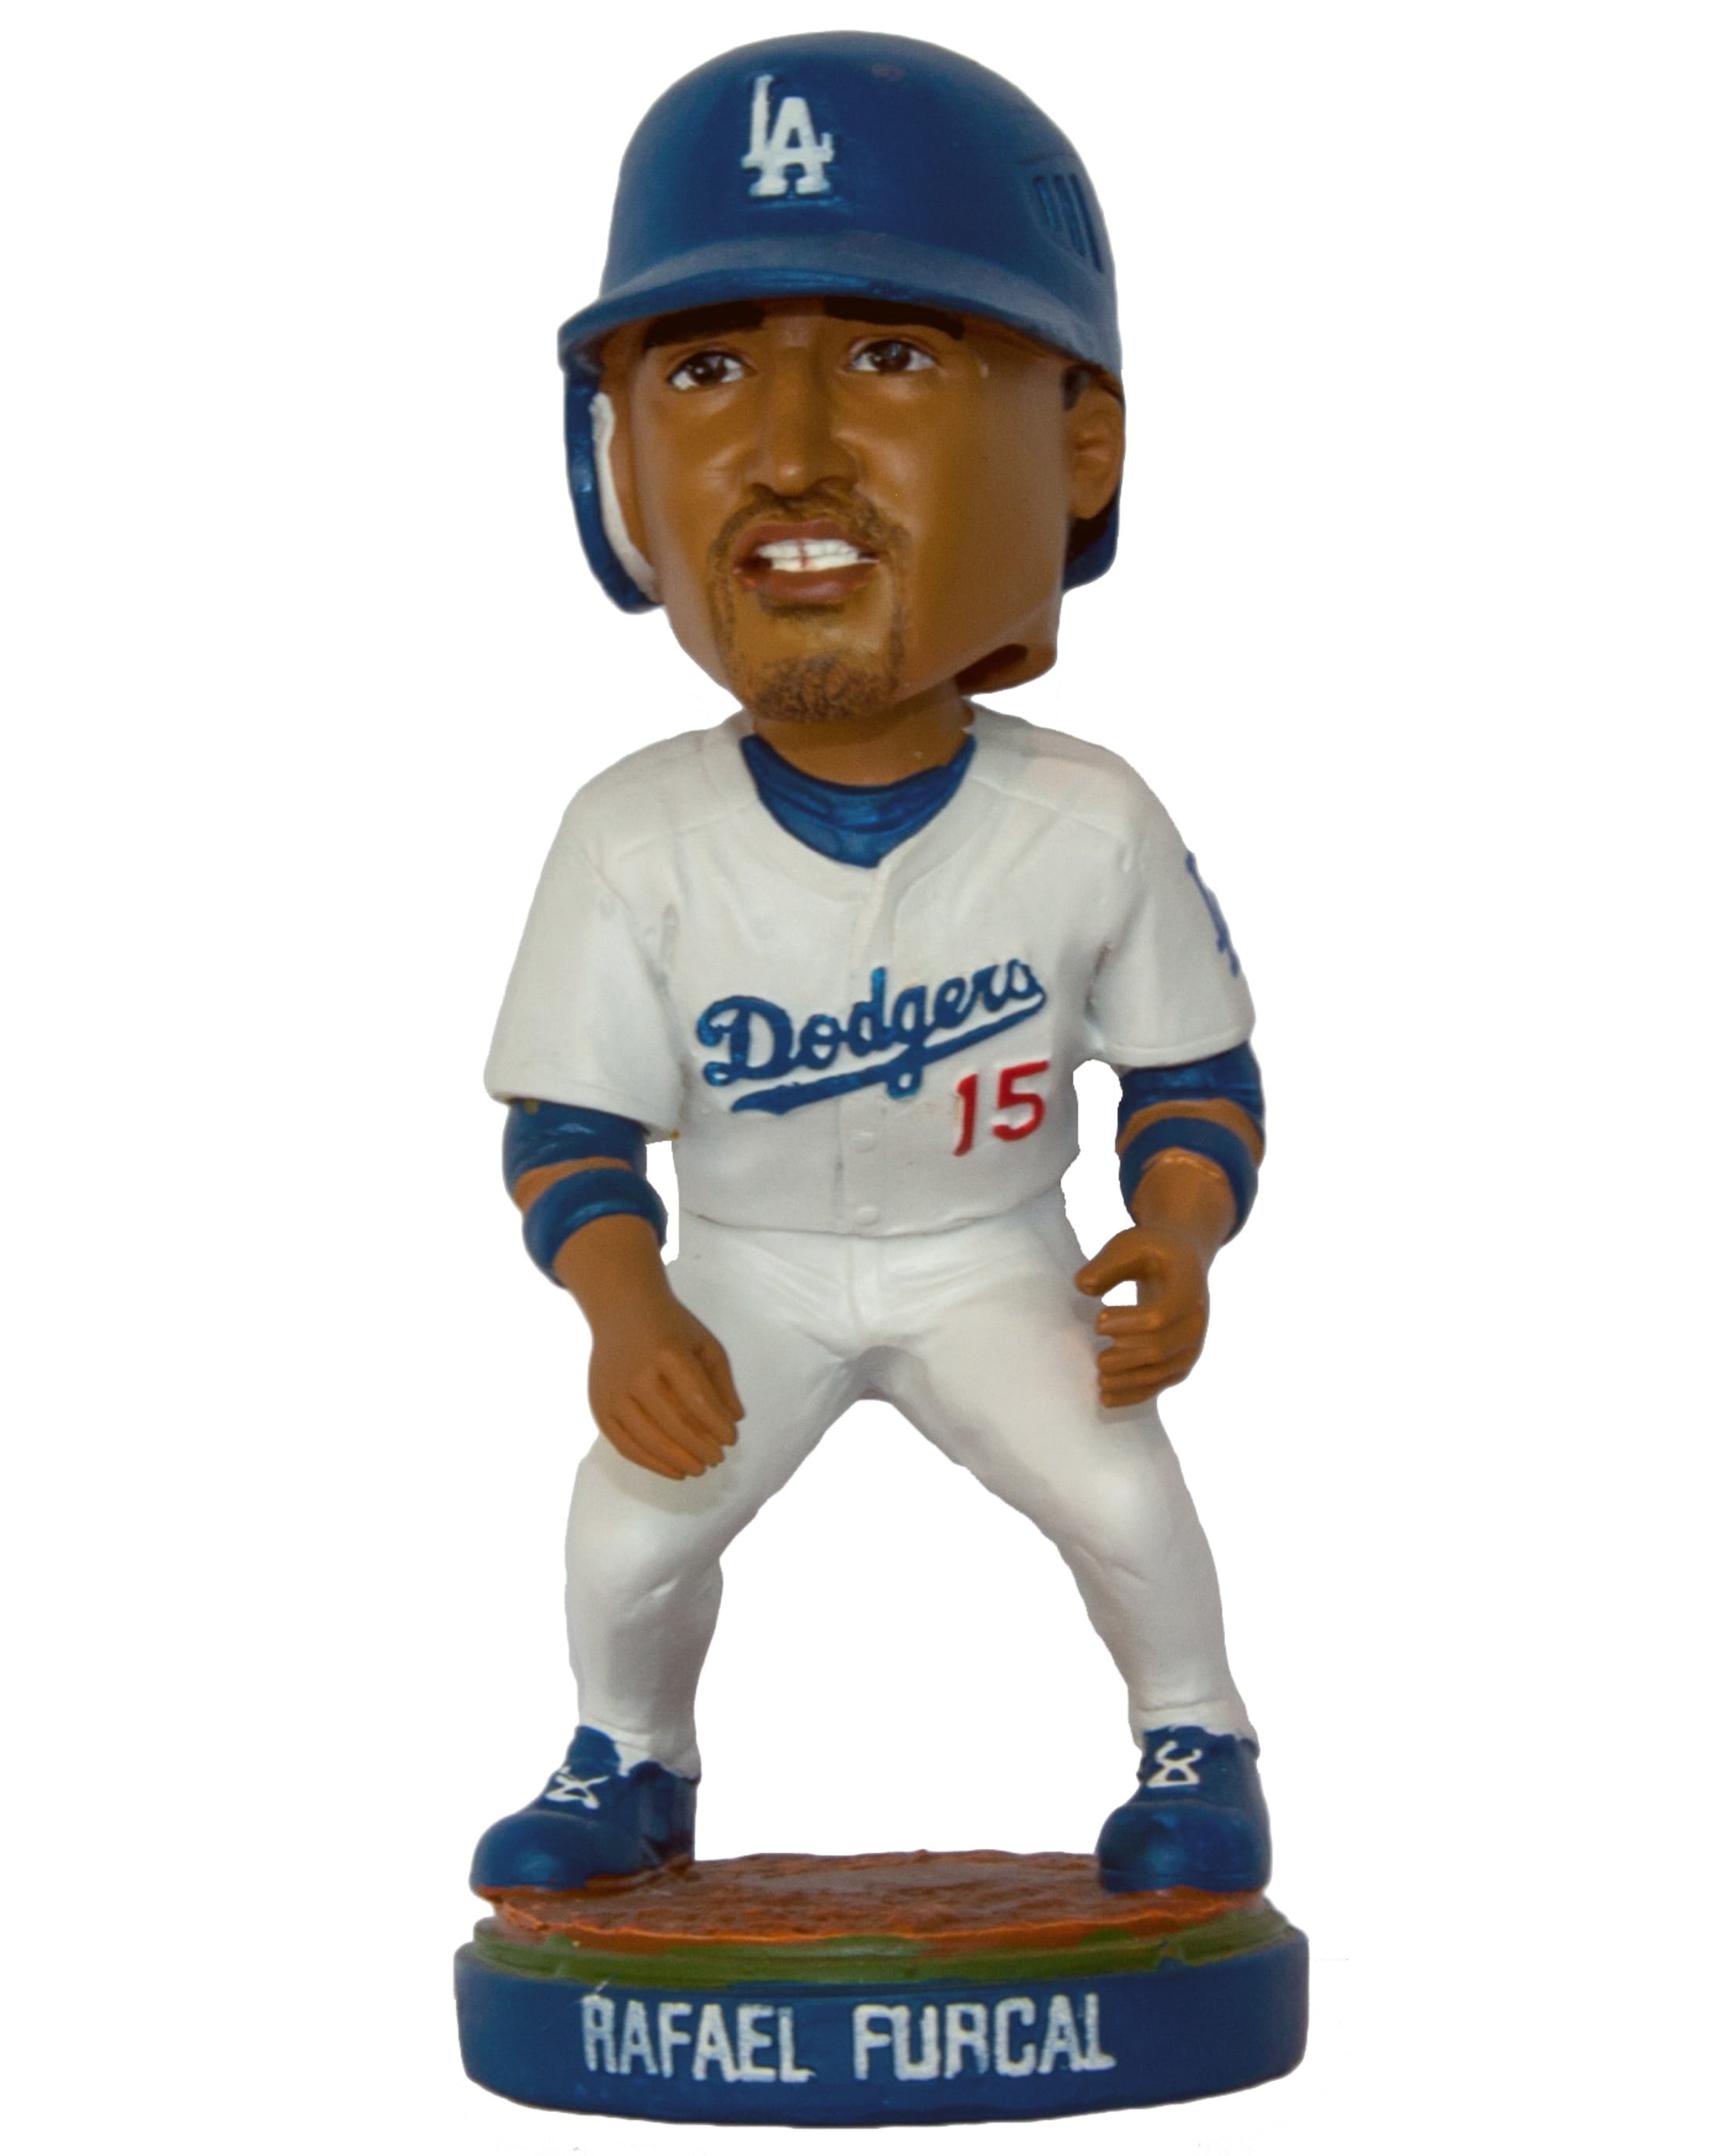 Dodgers Rafael Furcal Bobblehead for Sale in North Hollywood, CA